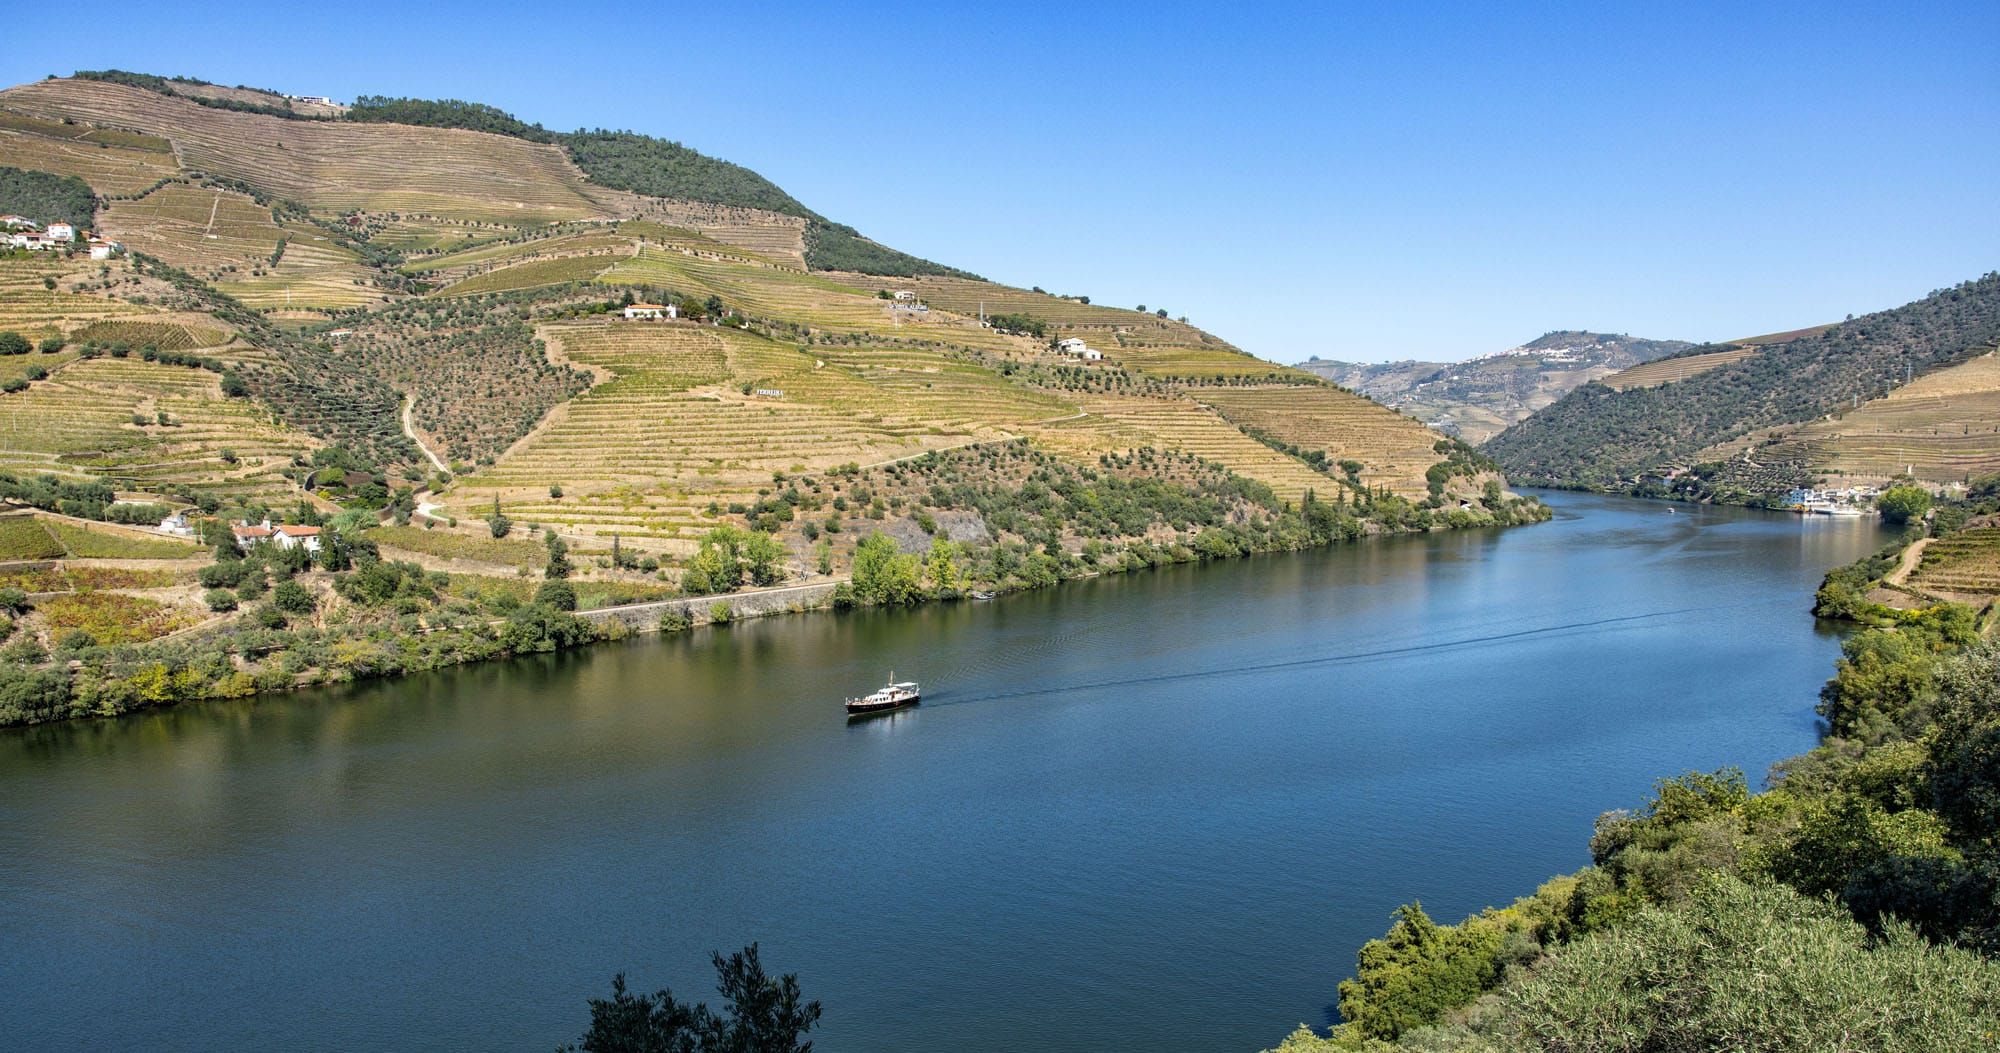 Featured image for “Douro Valley Day Trip from Porto: By Tour and Self-Guided”